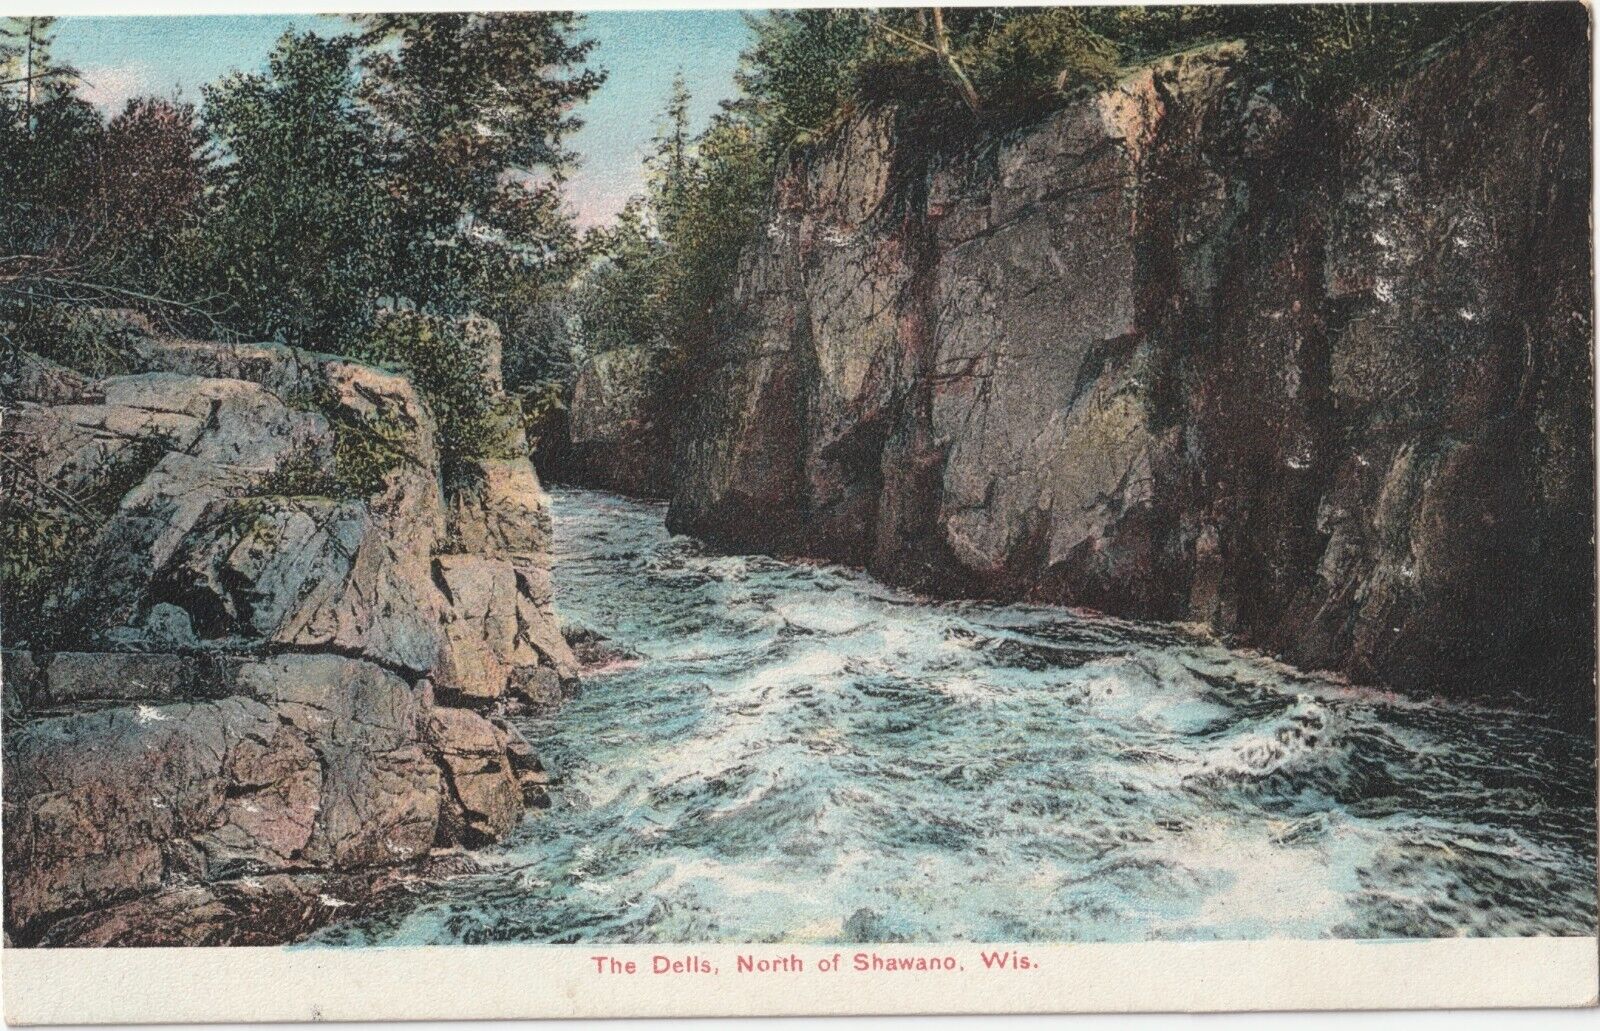 The Dells, North of Shawano, Wisconsin WI-antique unposted postcard